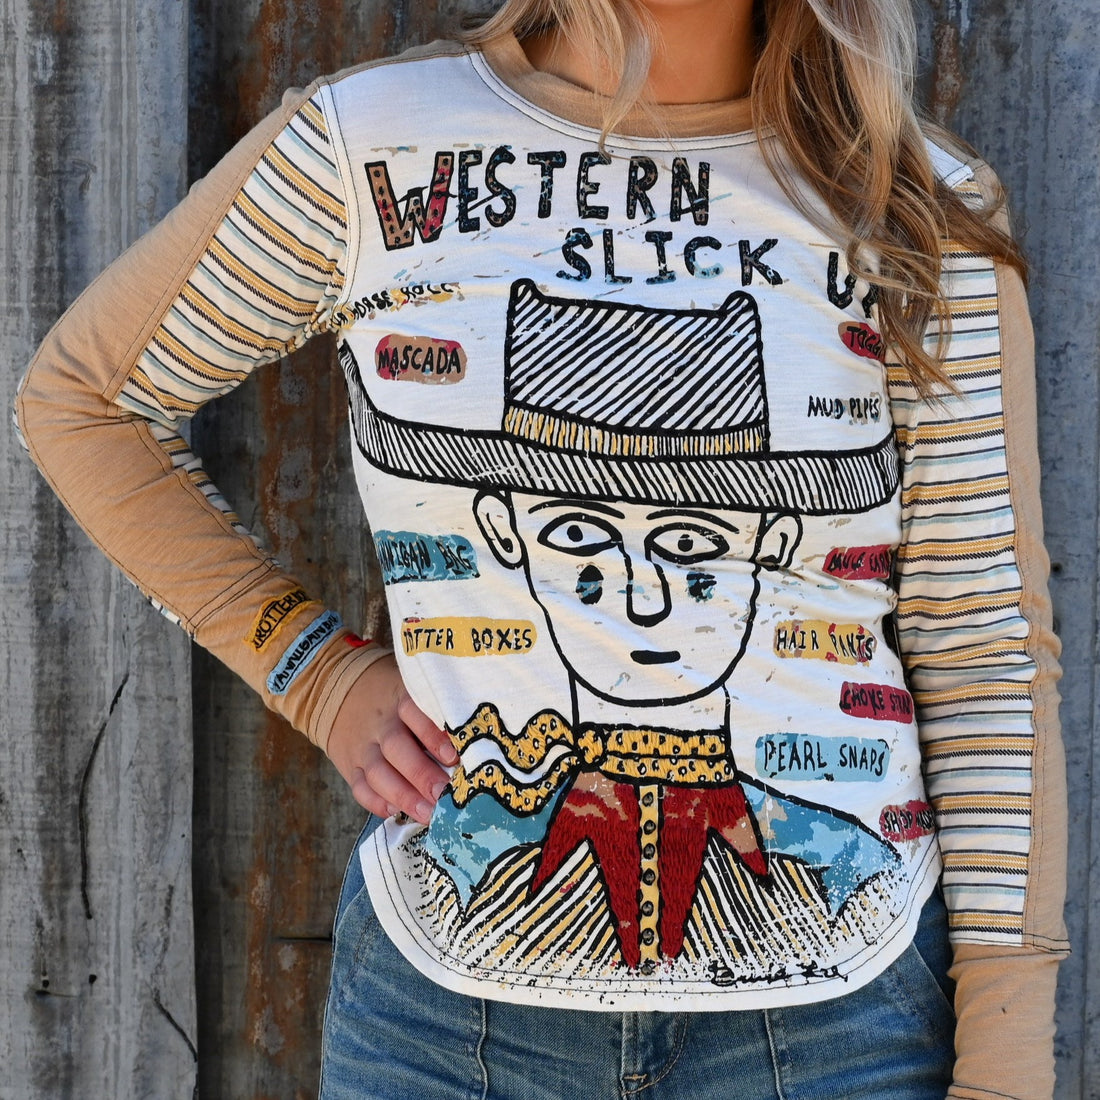 Double D Ranch Western Slick Up Tee in Graphic Print view of front